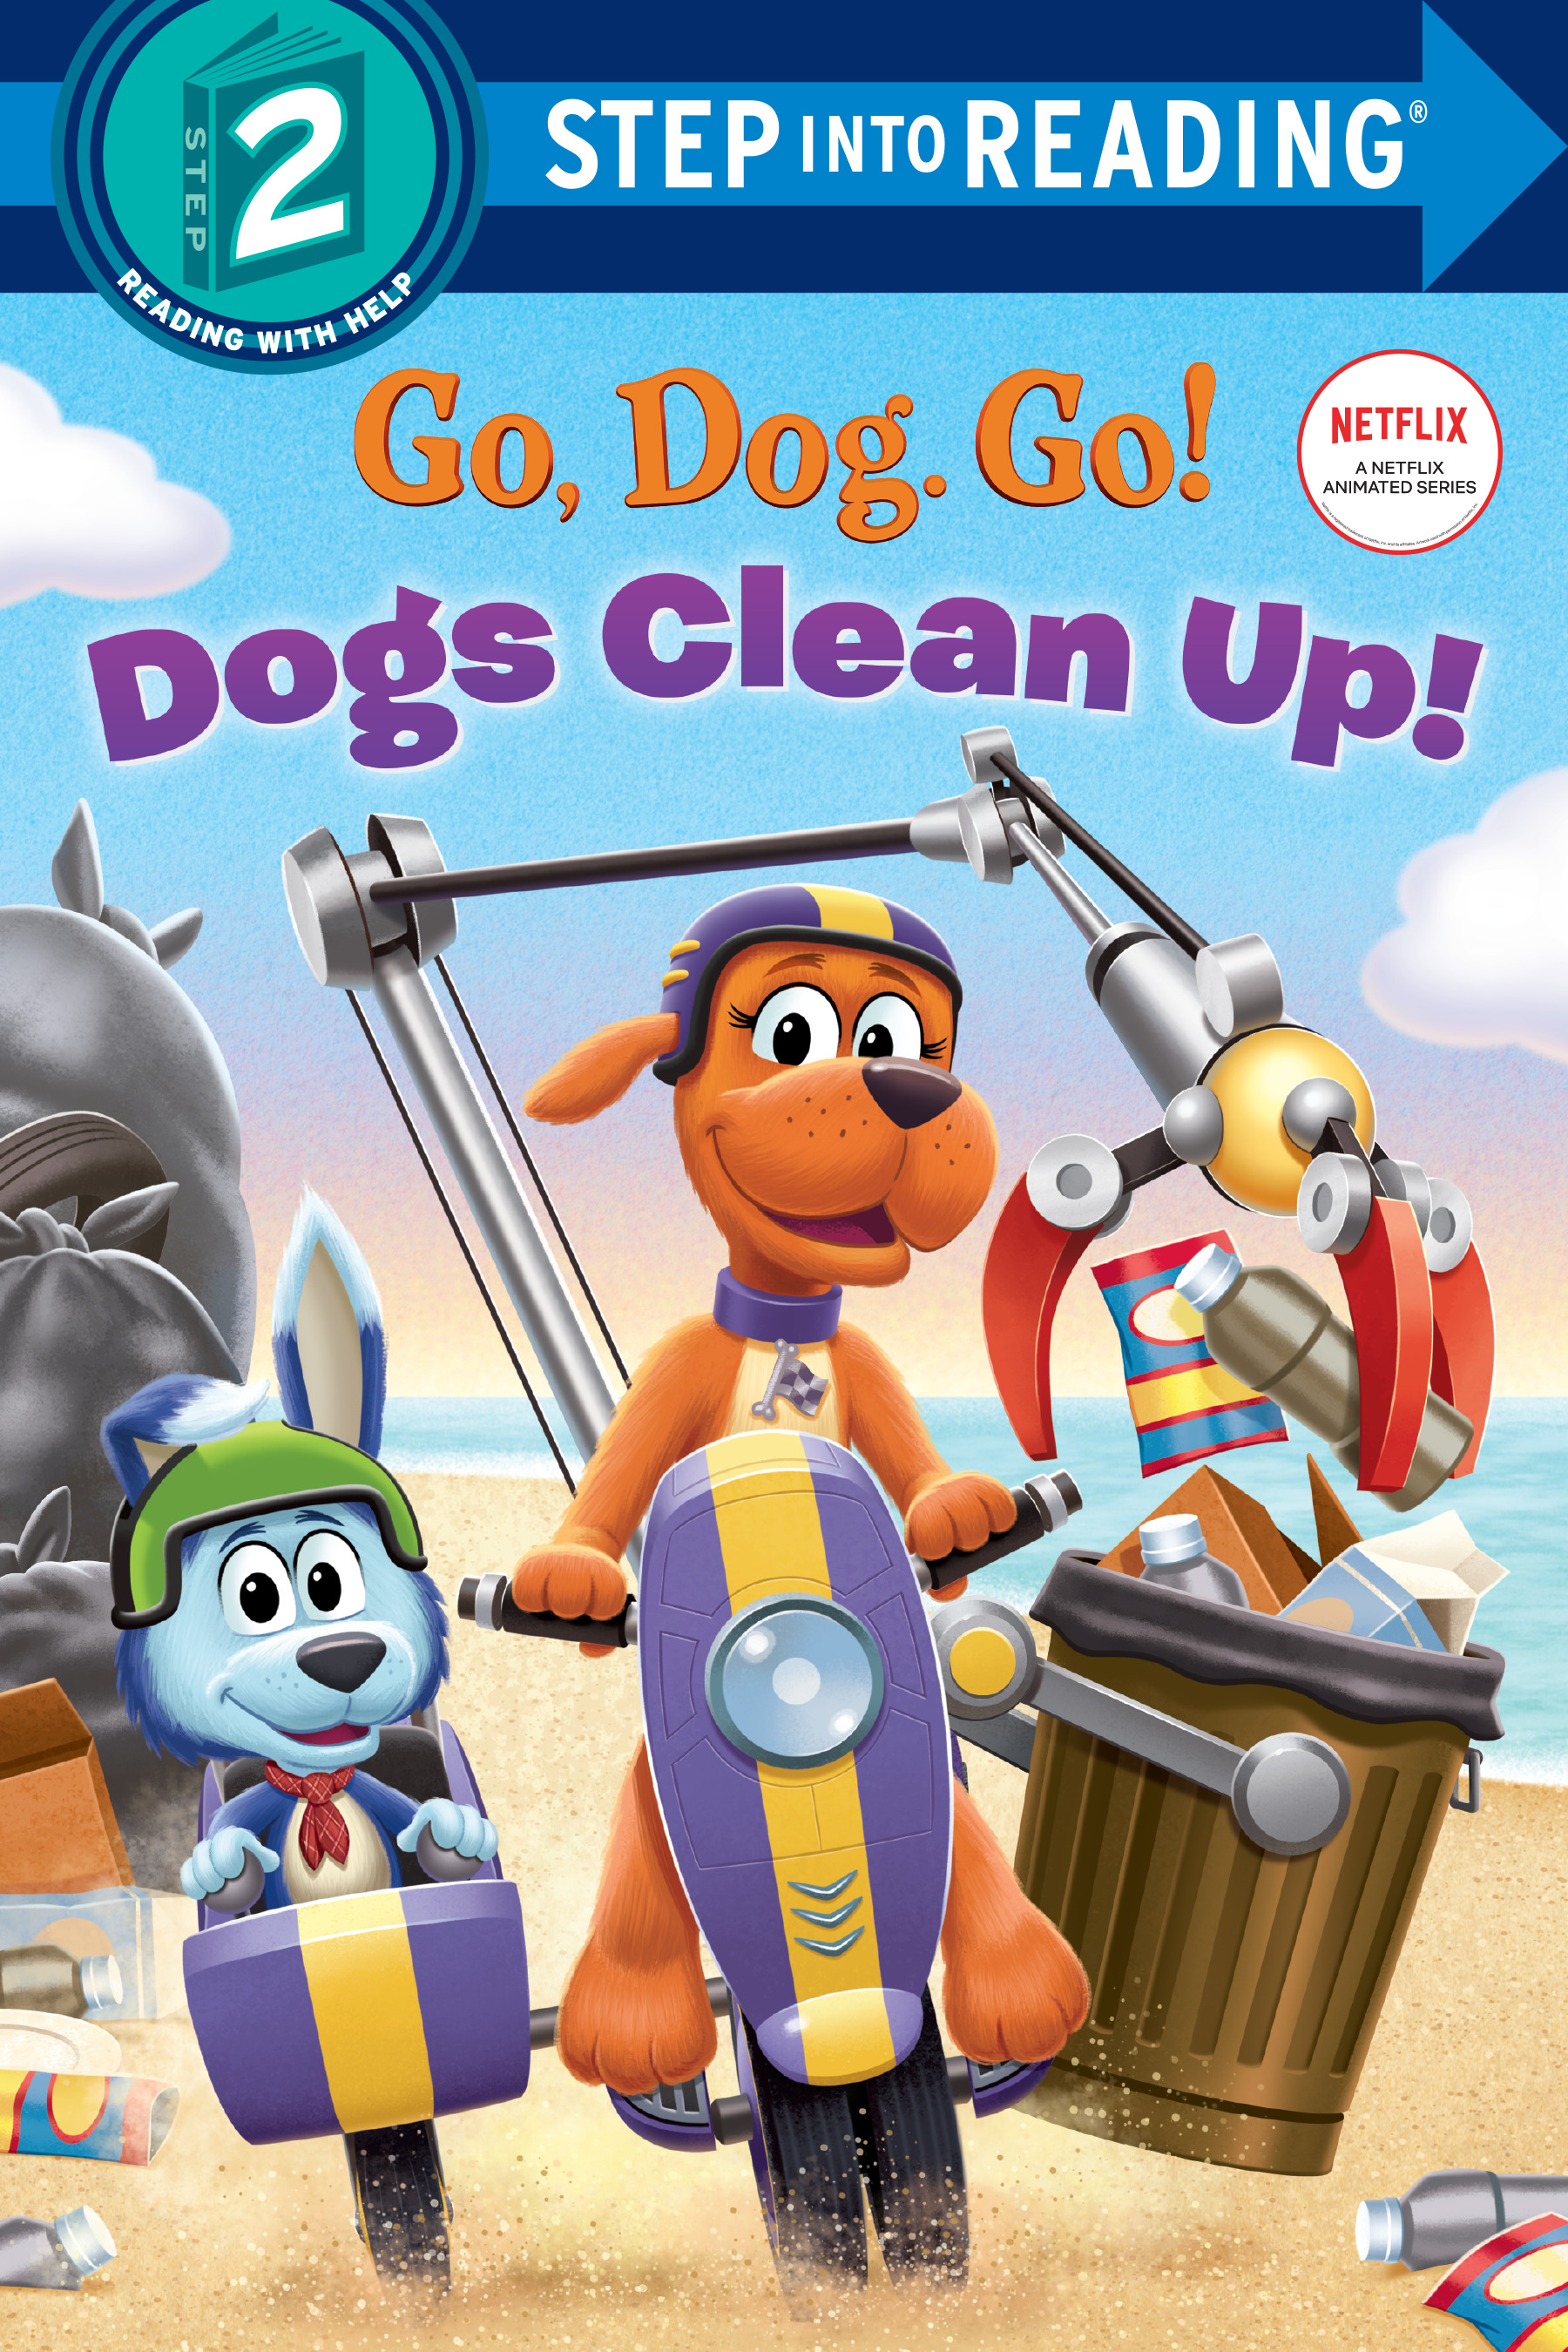 Step Into Reading - Dogs Clean Up! (Netflix: Go, Dog. Go!) | 